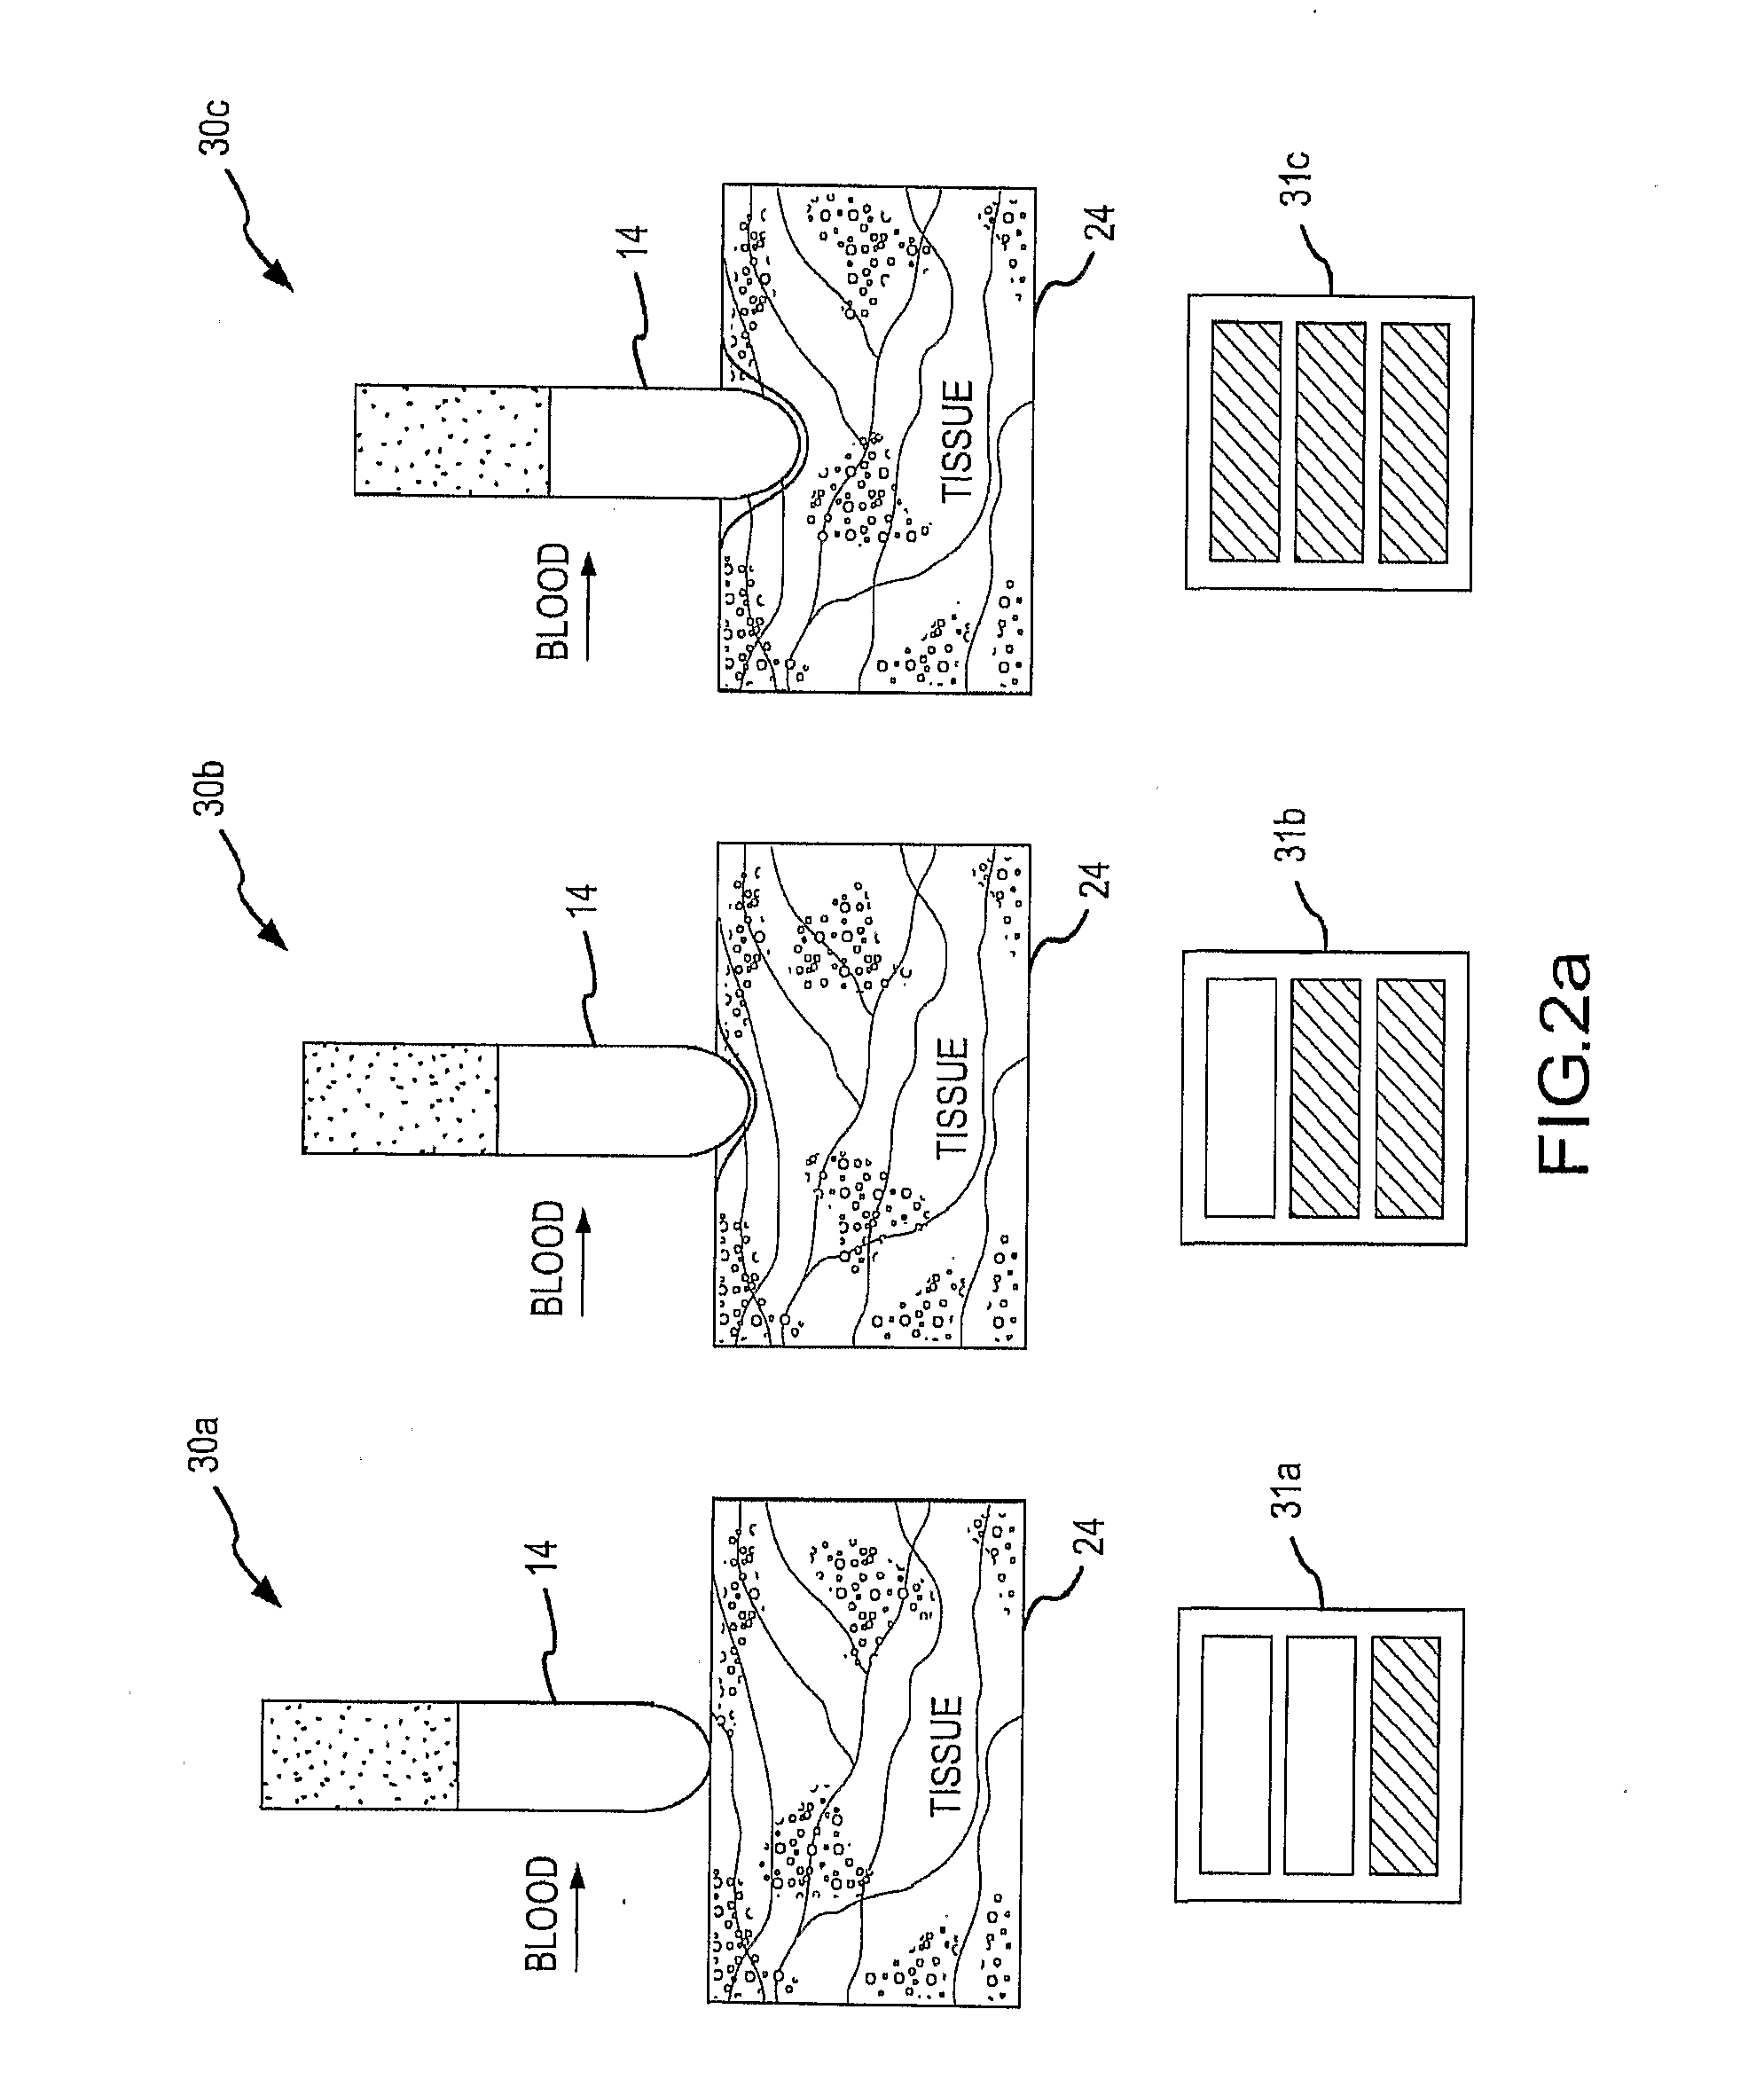 Method for Displaying Catheter Electrode-Tissue Contact in Electro-Anatomic Mapping and Navigation System